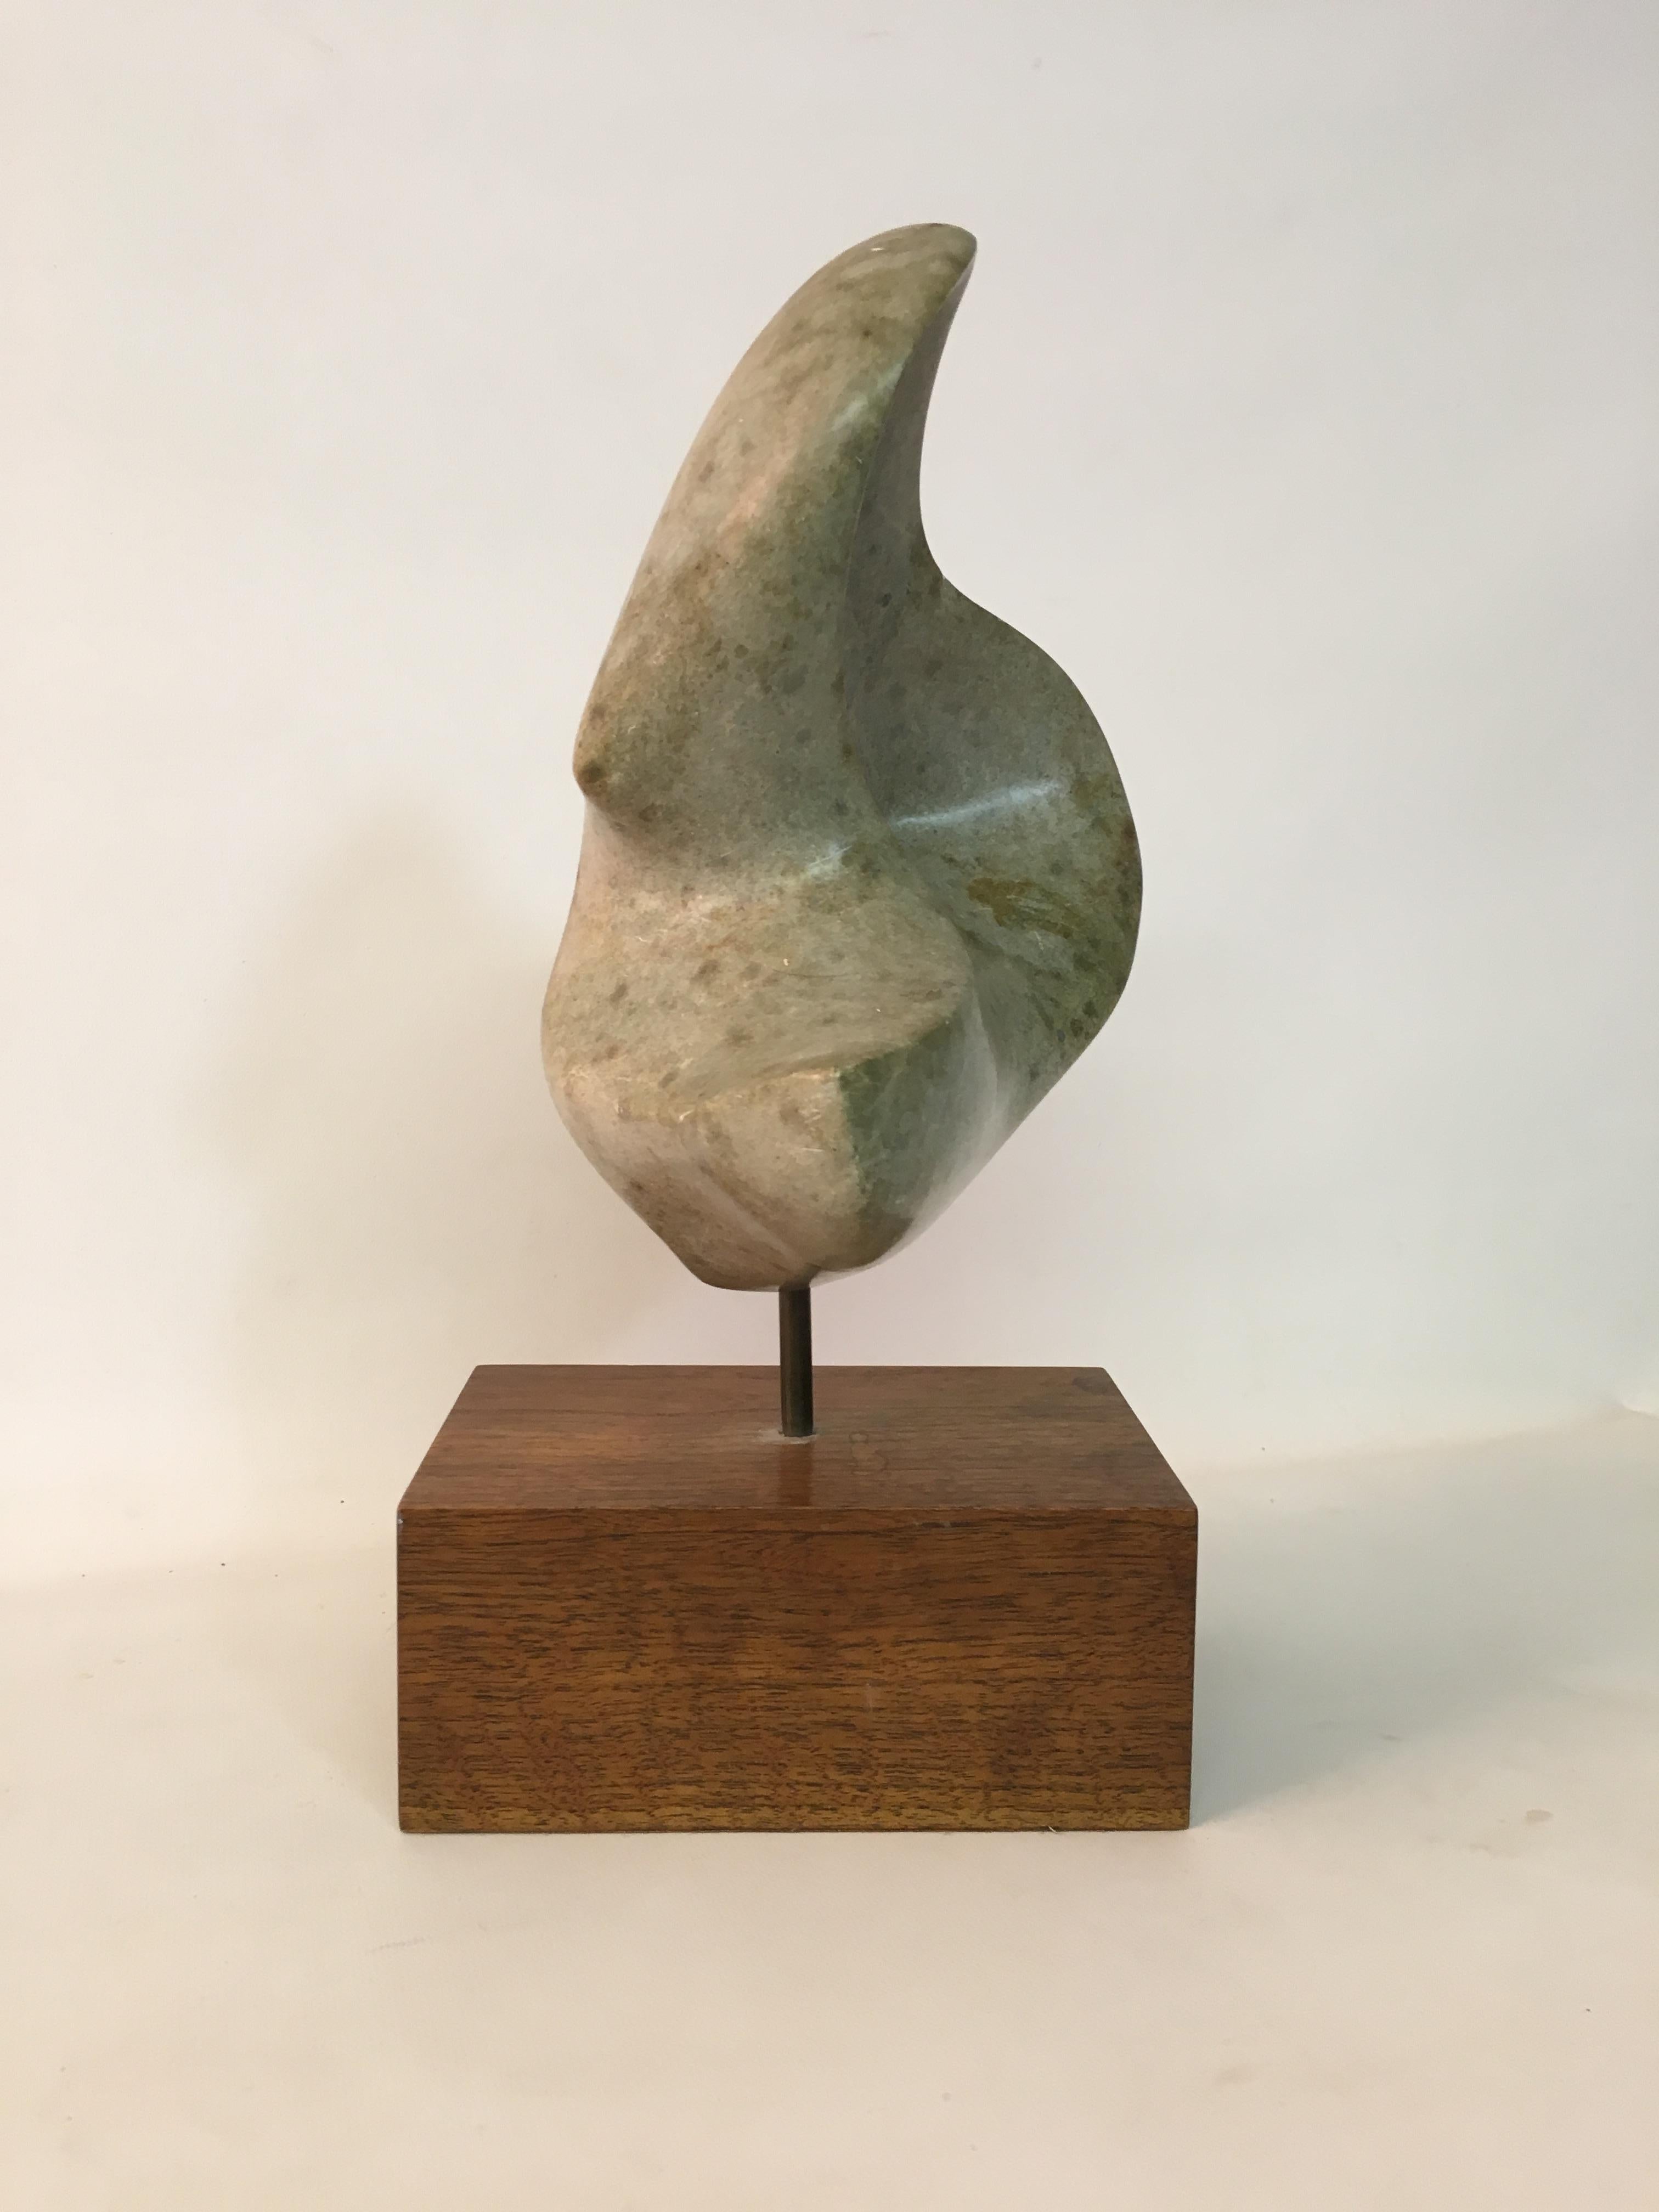 Carved 1960s Modernist Organic Abstract Sculpture